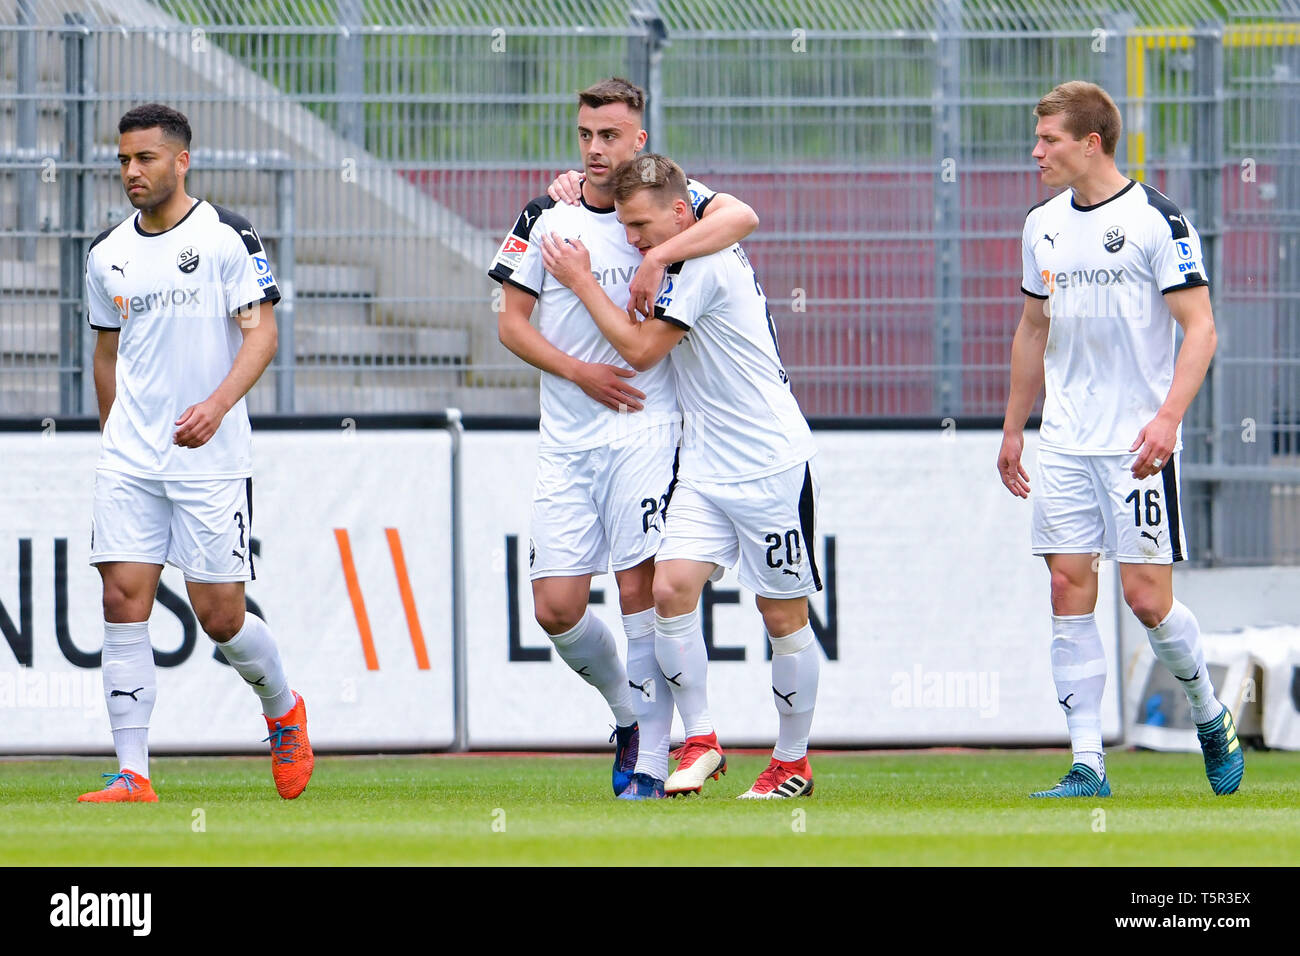 27 April 2019, Baden-Wuerttemberg, Sandhausen: Soccer: 2nd Bundesliga, SV Sandhausen - Holstein Kiel, 31st matchday, at Hardtwald Stadium. Sandhausens Andrew Wooten (l-r), goal scorer Philipp Förster, Emanuel Taffertshofer and Kevin Behrens cheer about the goal to 1:1. Photo: Uwe Anspach/dpa - IMPORTANT NOTE: In accordance with the requirements of the DFL Deutsche Fußball Liga or the DFB Deutscher Fußball-Bund, it is prohibited to use or have used photographs taken in the stadium and/or the match in the form of sequence images and/or video-like photo sequences. Stock Photo